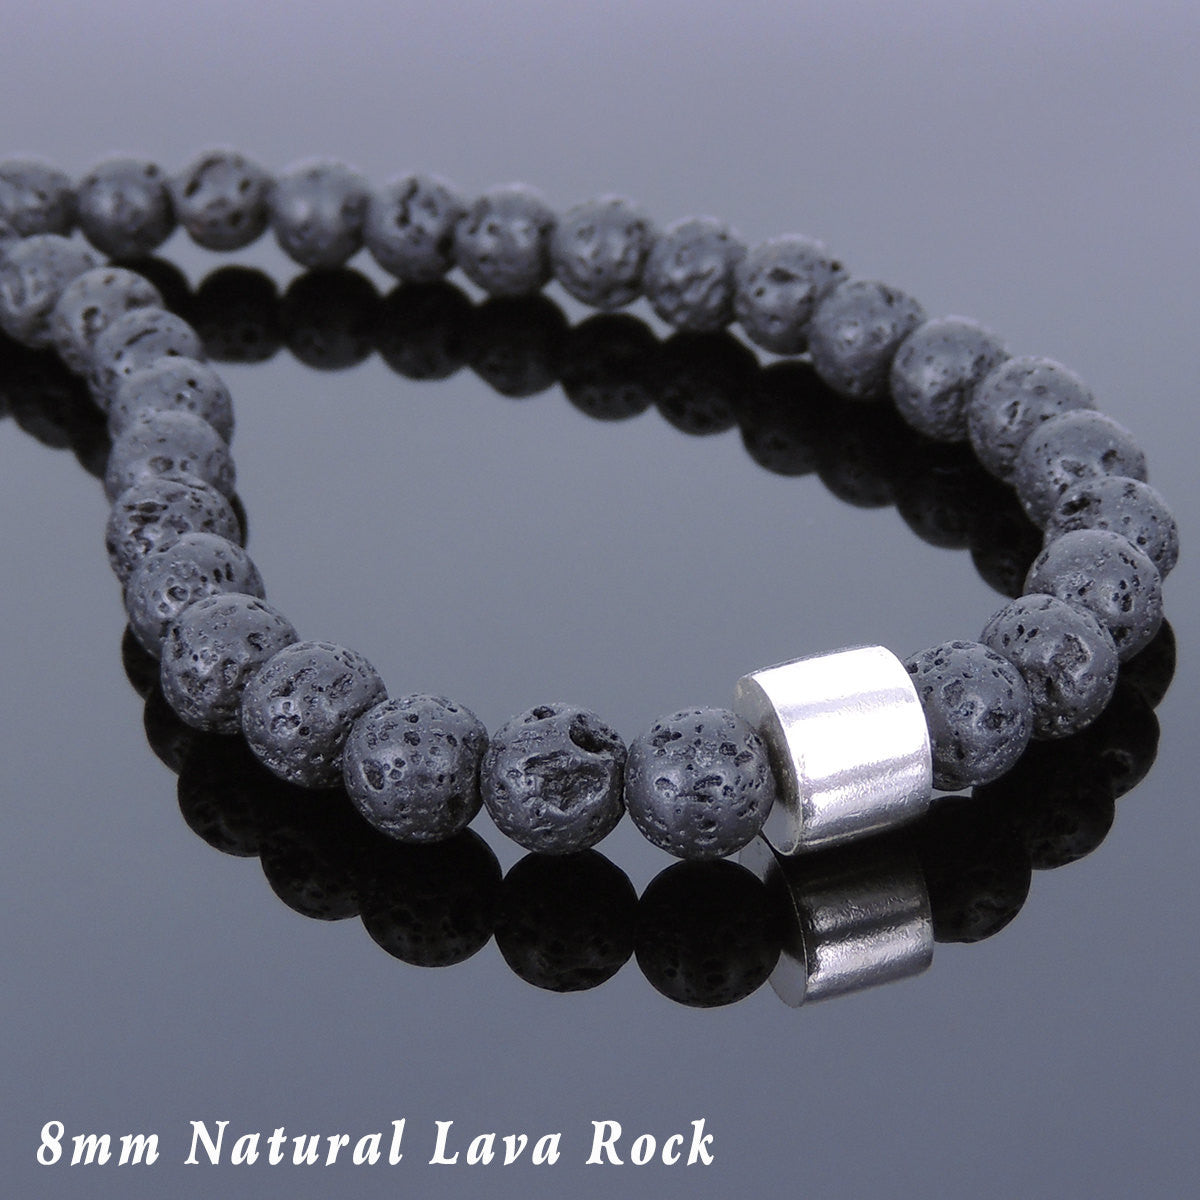 8mm Lava Rock Healing Stone Necklace with S925 Sterling Silver Simple Protection Barrel Bead & S-Hook Clasp - Handmade by Gem & Silver NK111